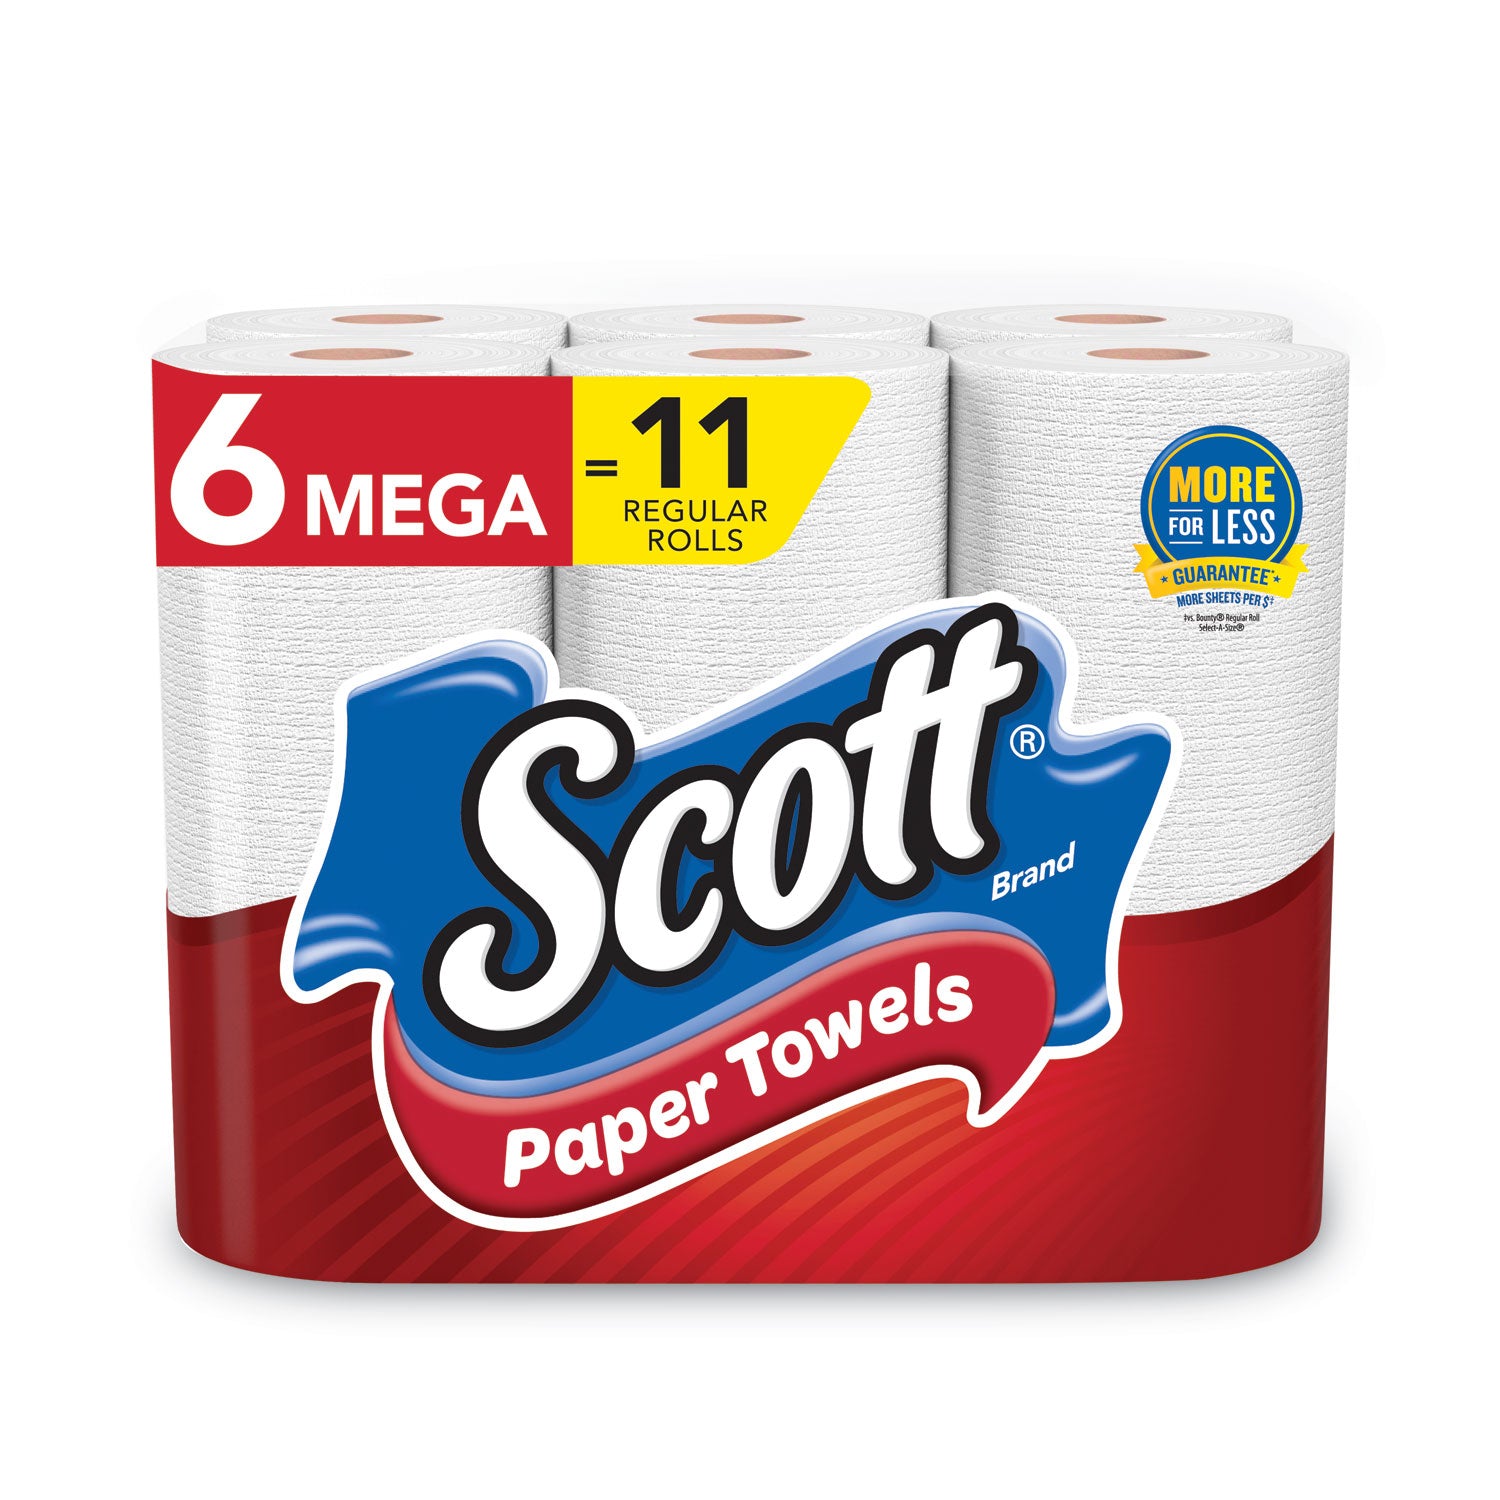 Choose-a-Size Mega Kitchen Roll Paper Towels, 1-Ply, 102/Roll, 6 Rolls/Pack, 4 Packs/Carton - 